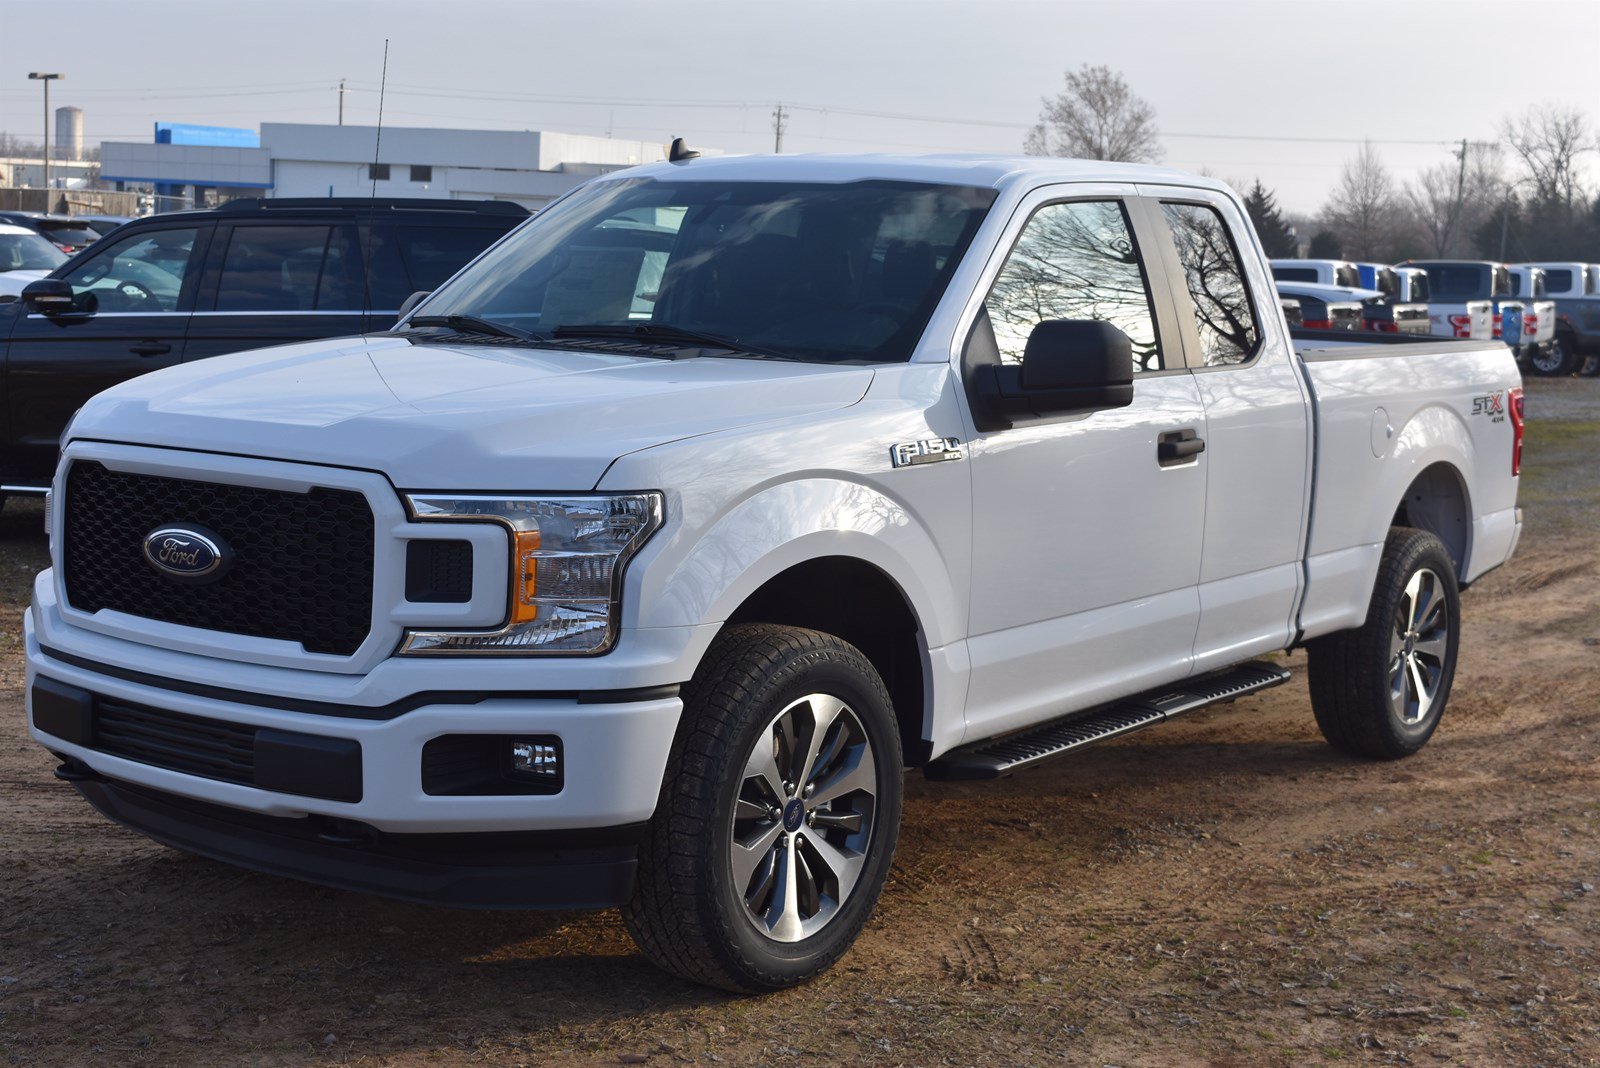 New 2020 Ford F-150 STX 4WD Extended Cab Extended Cab Pickup in